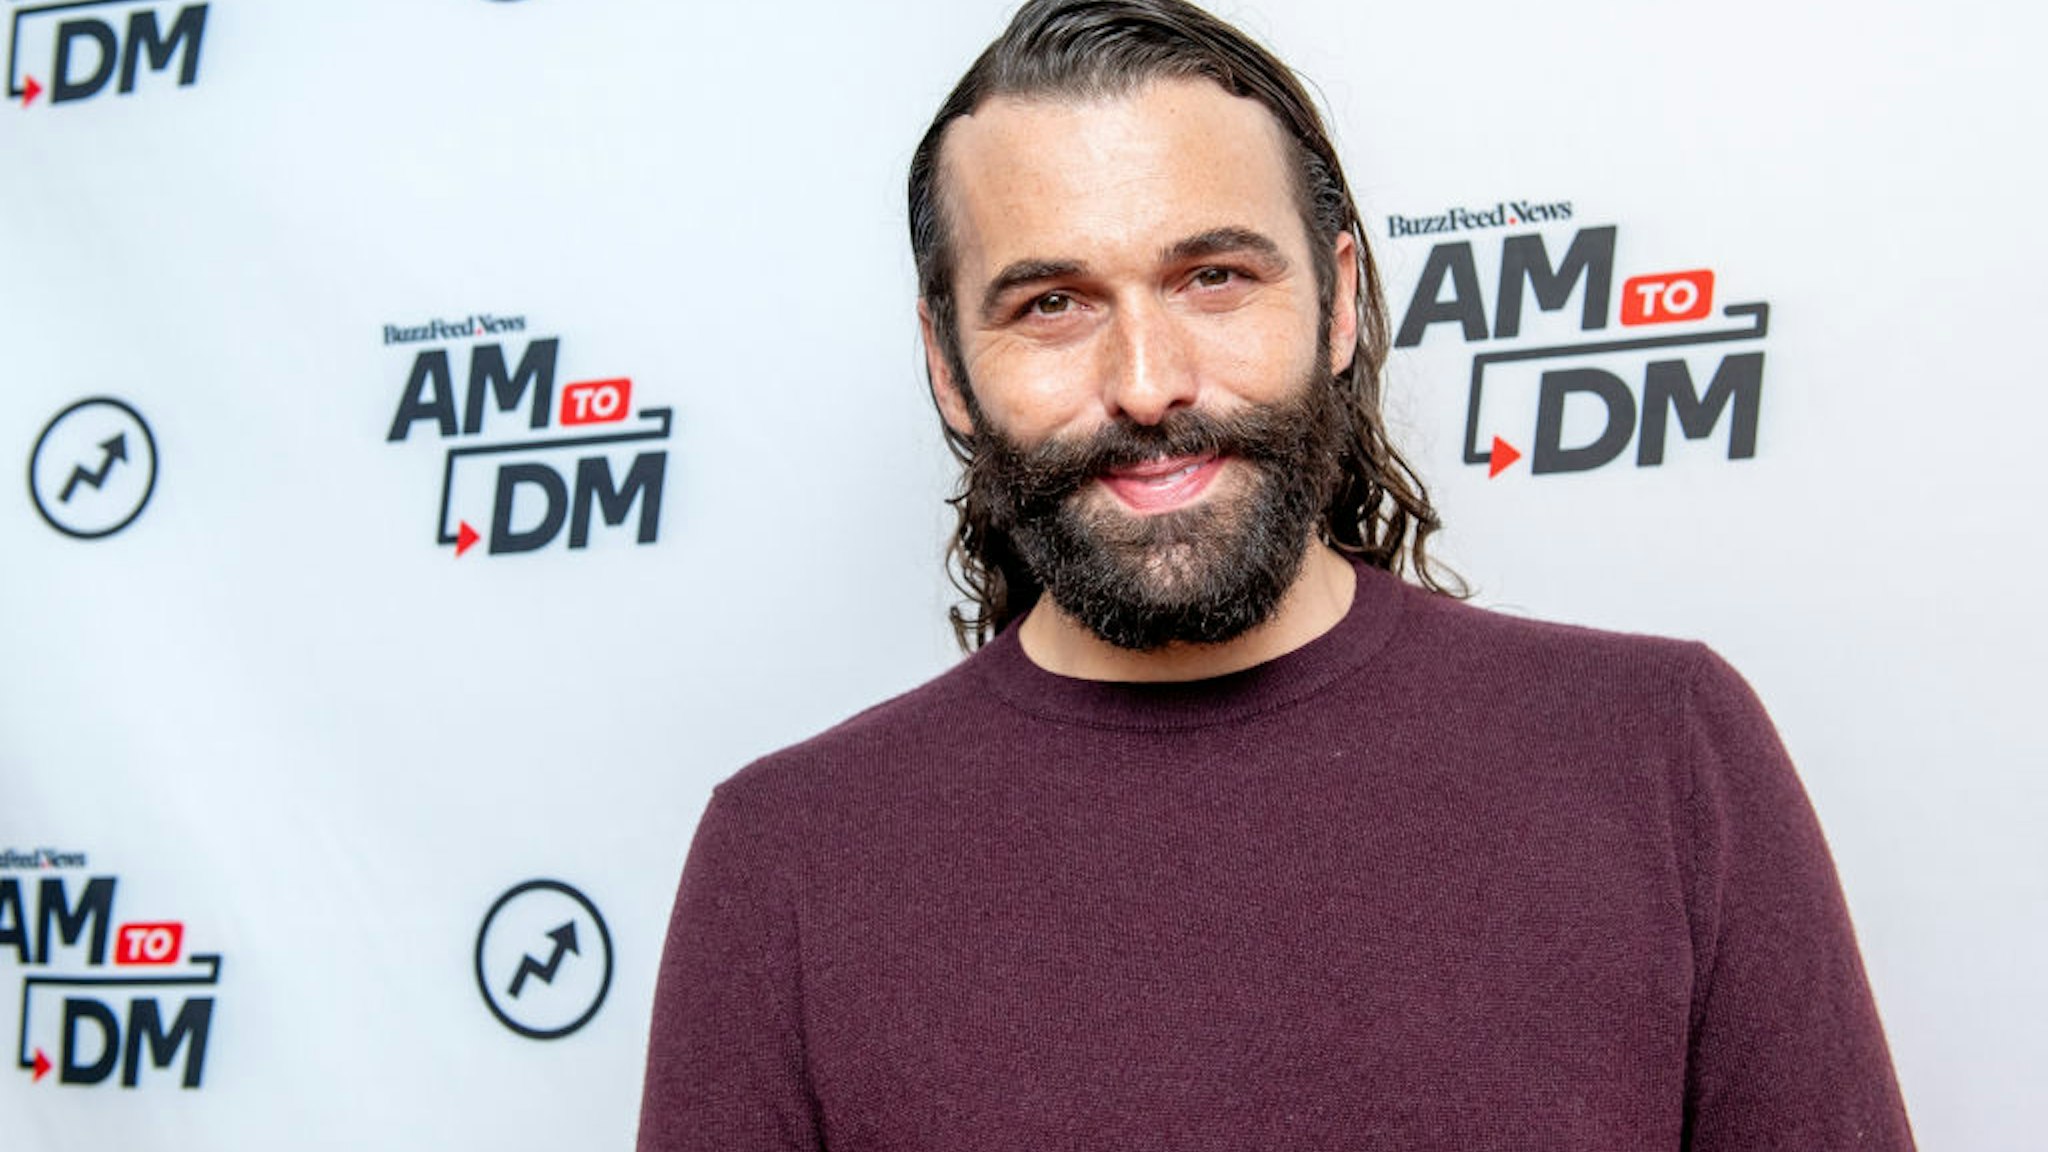 Jonathan Van Ness visits BuzzFeed's "AM To DM" on October 31, 2019 in New York City.